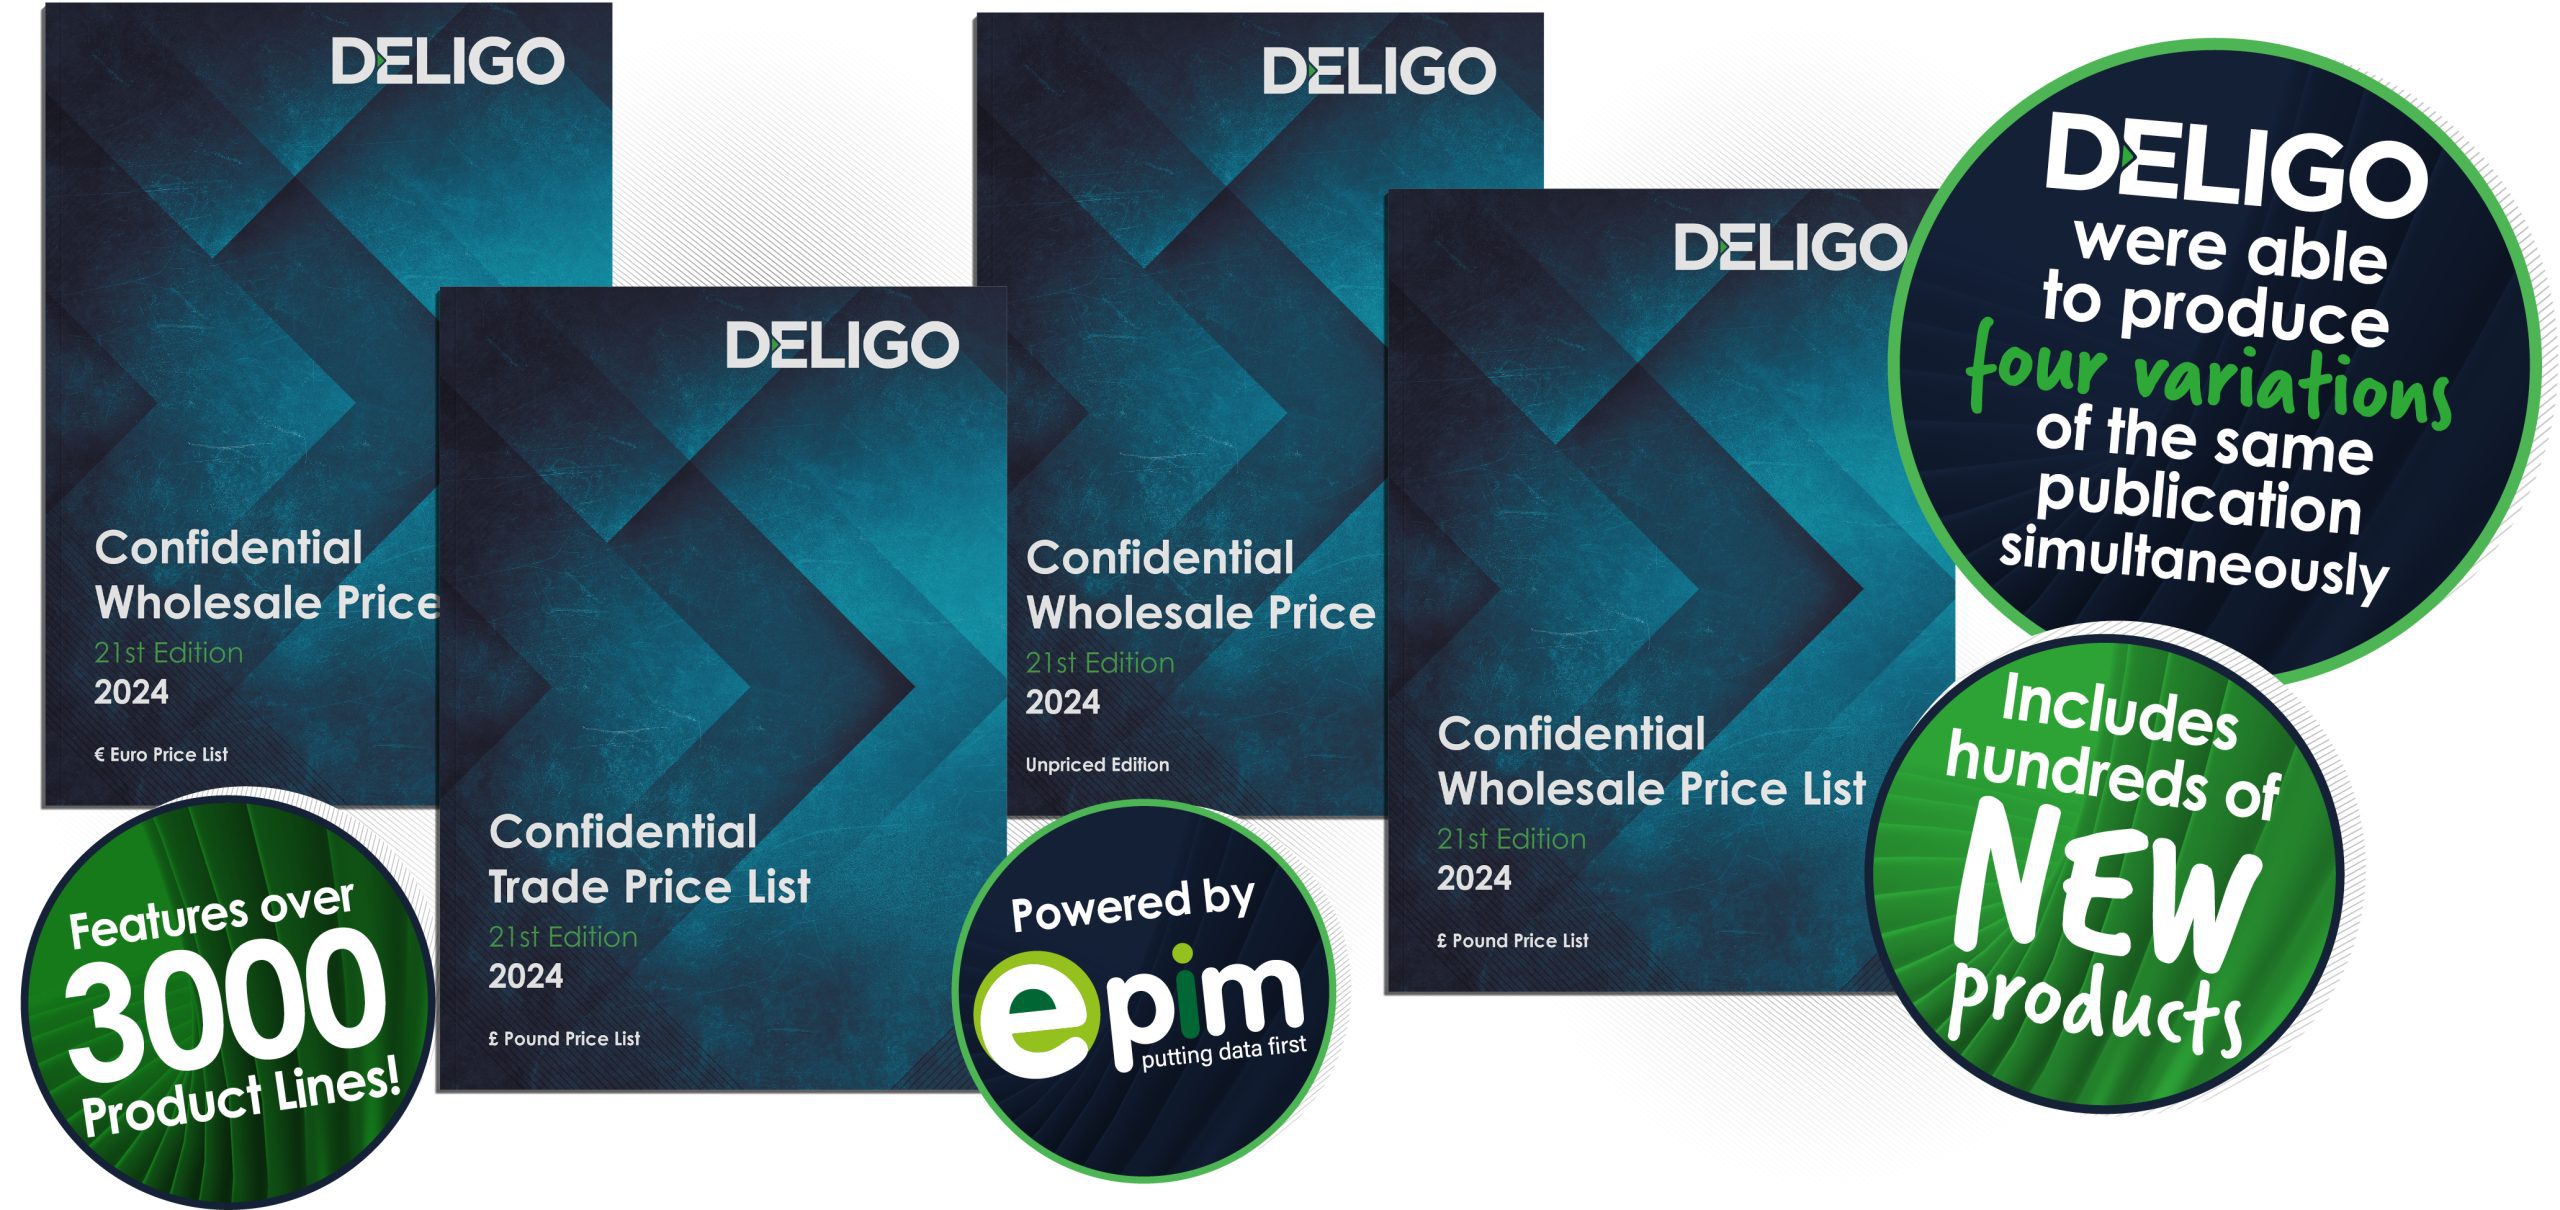 Deligo have been able to produce four variations of their Price List by using e-Pim